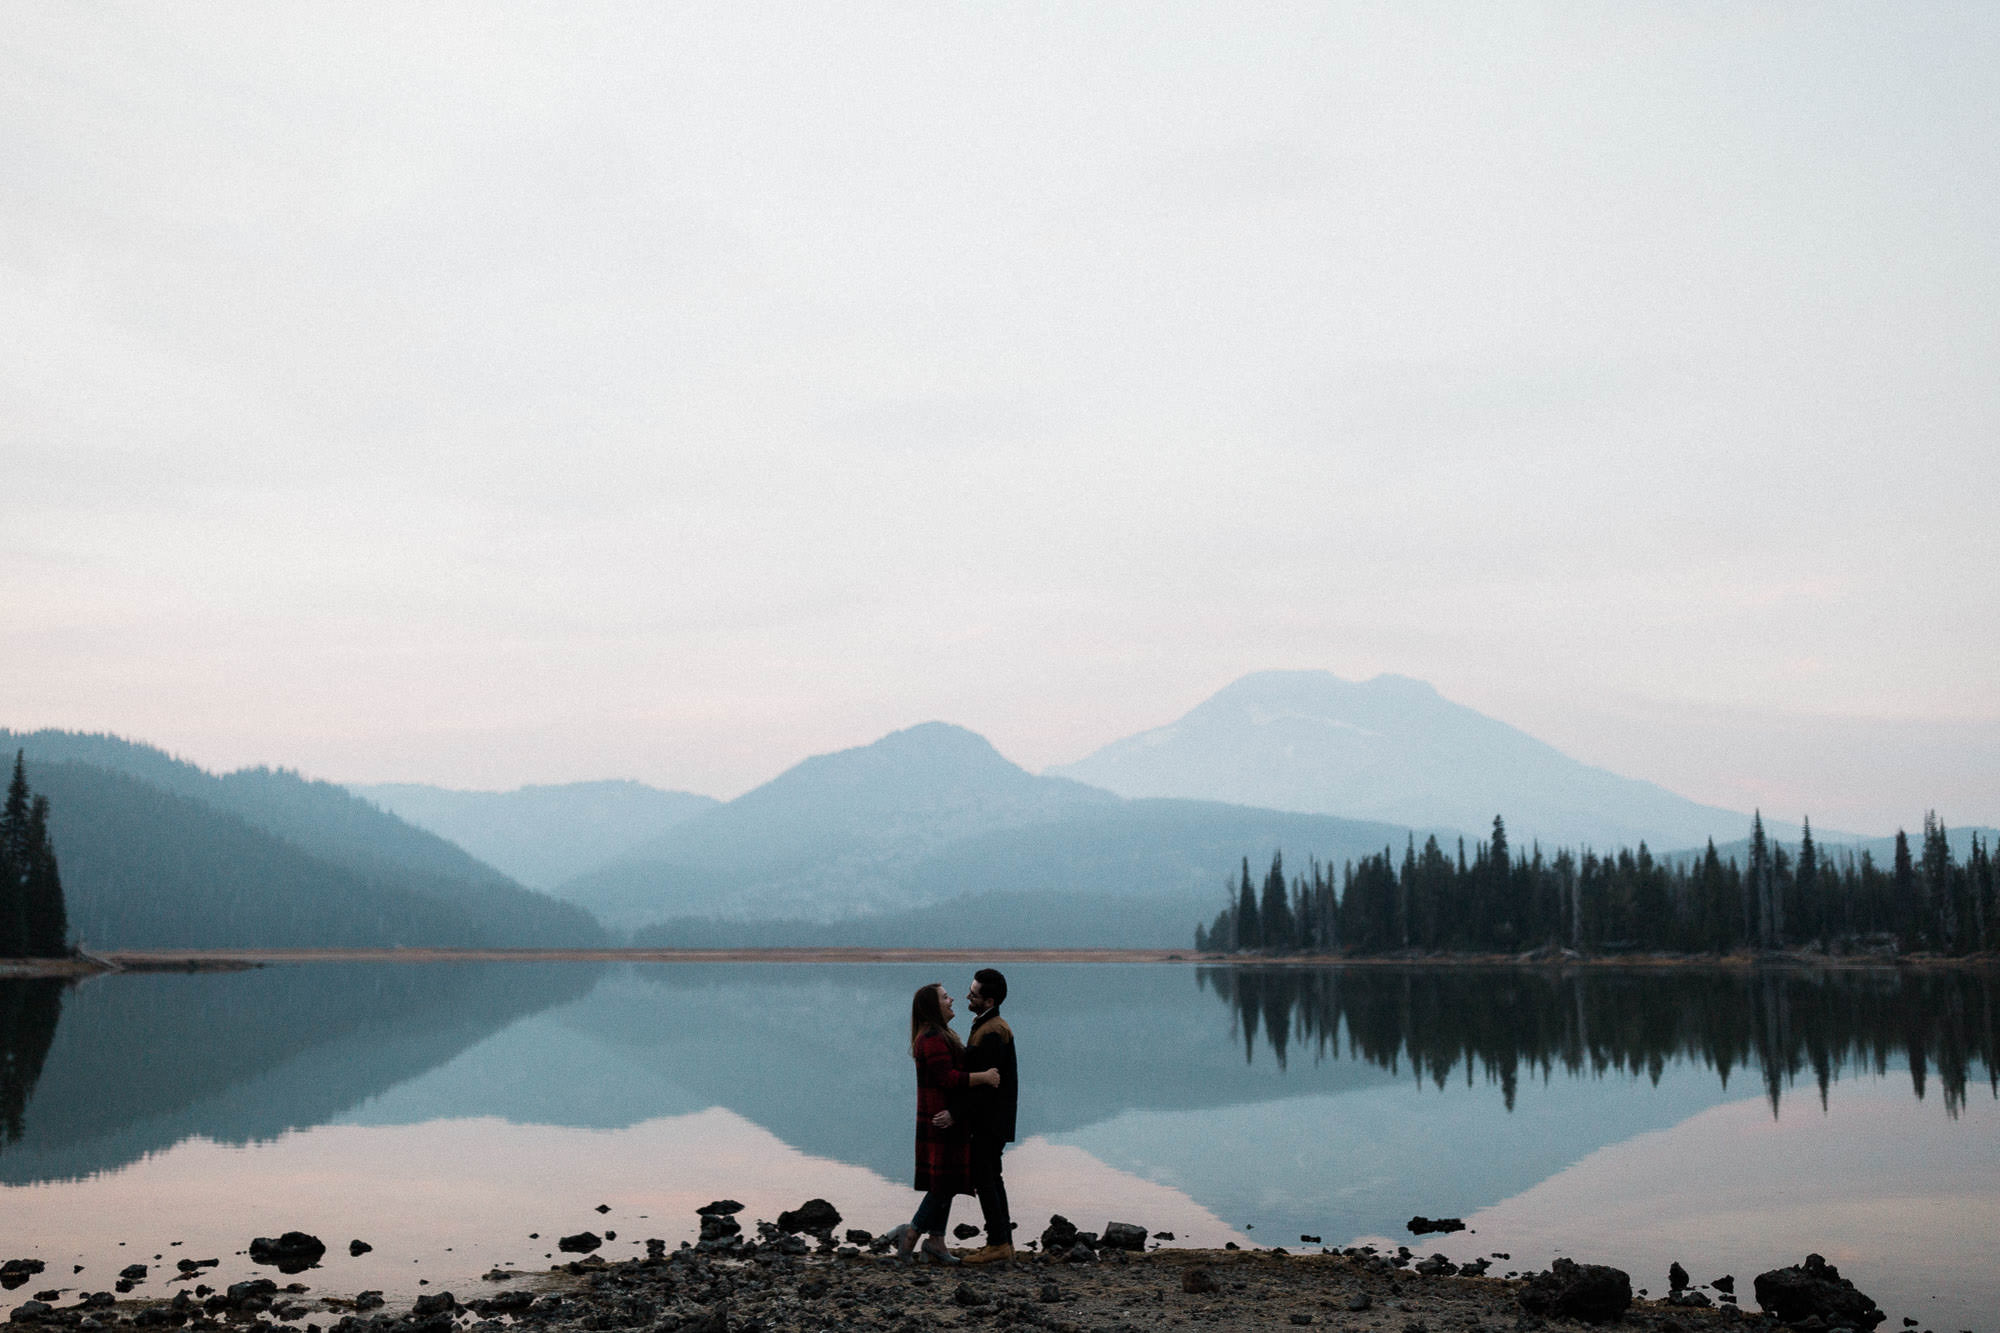 A couple embraces in front of mountain views on the shores of Sparks Lake, Oregon